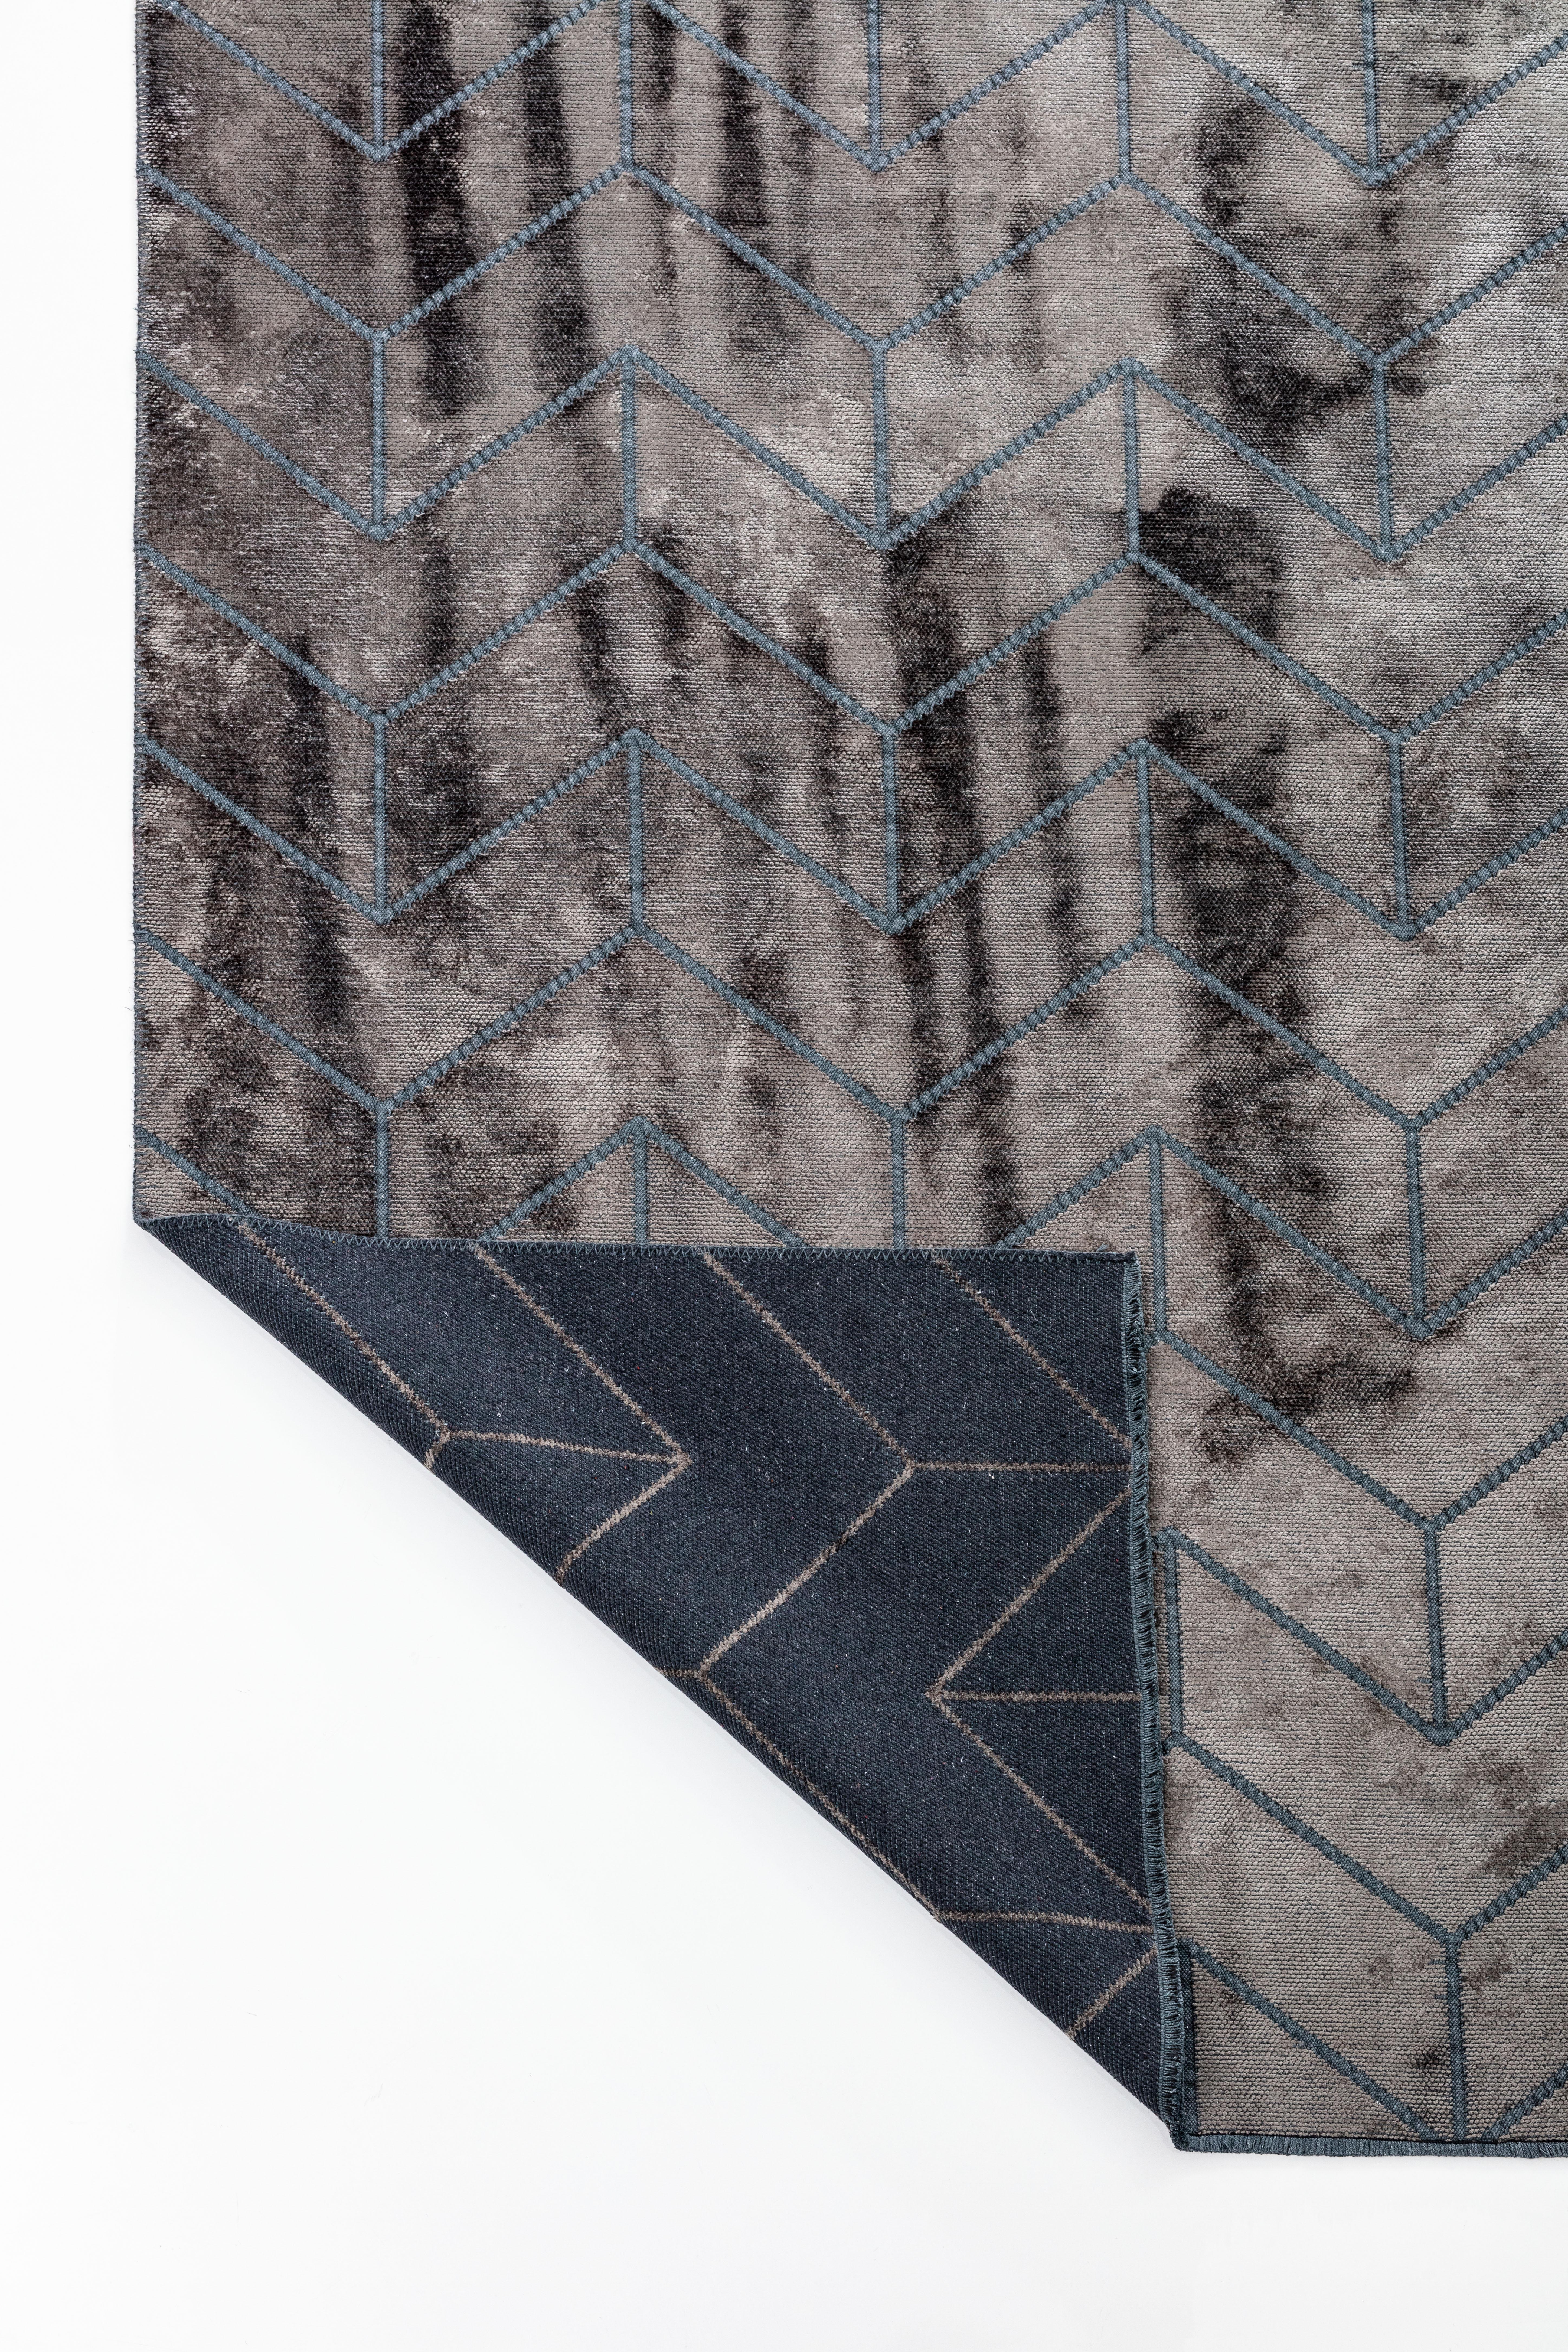 Post-Modern Modern Chevron Dark Brown and Charcoal Chenille Area Rug Ready to Ship For Sale